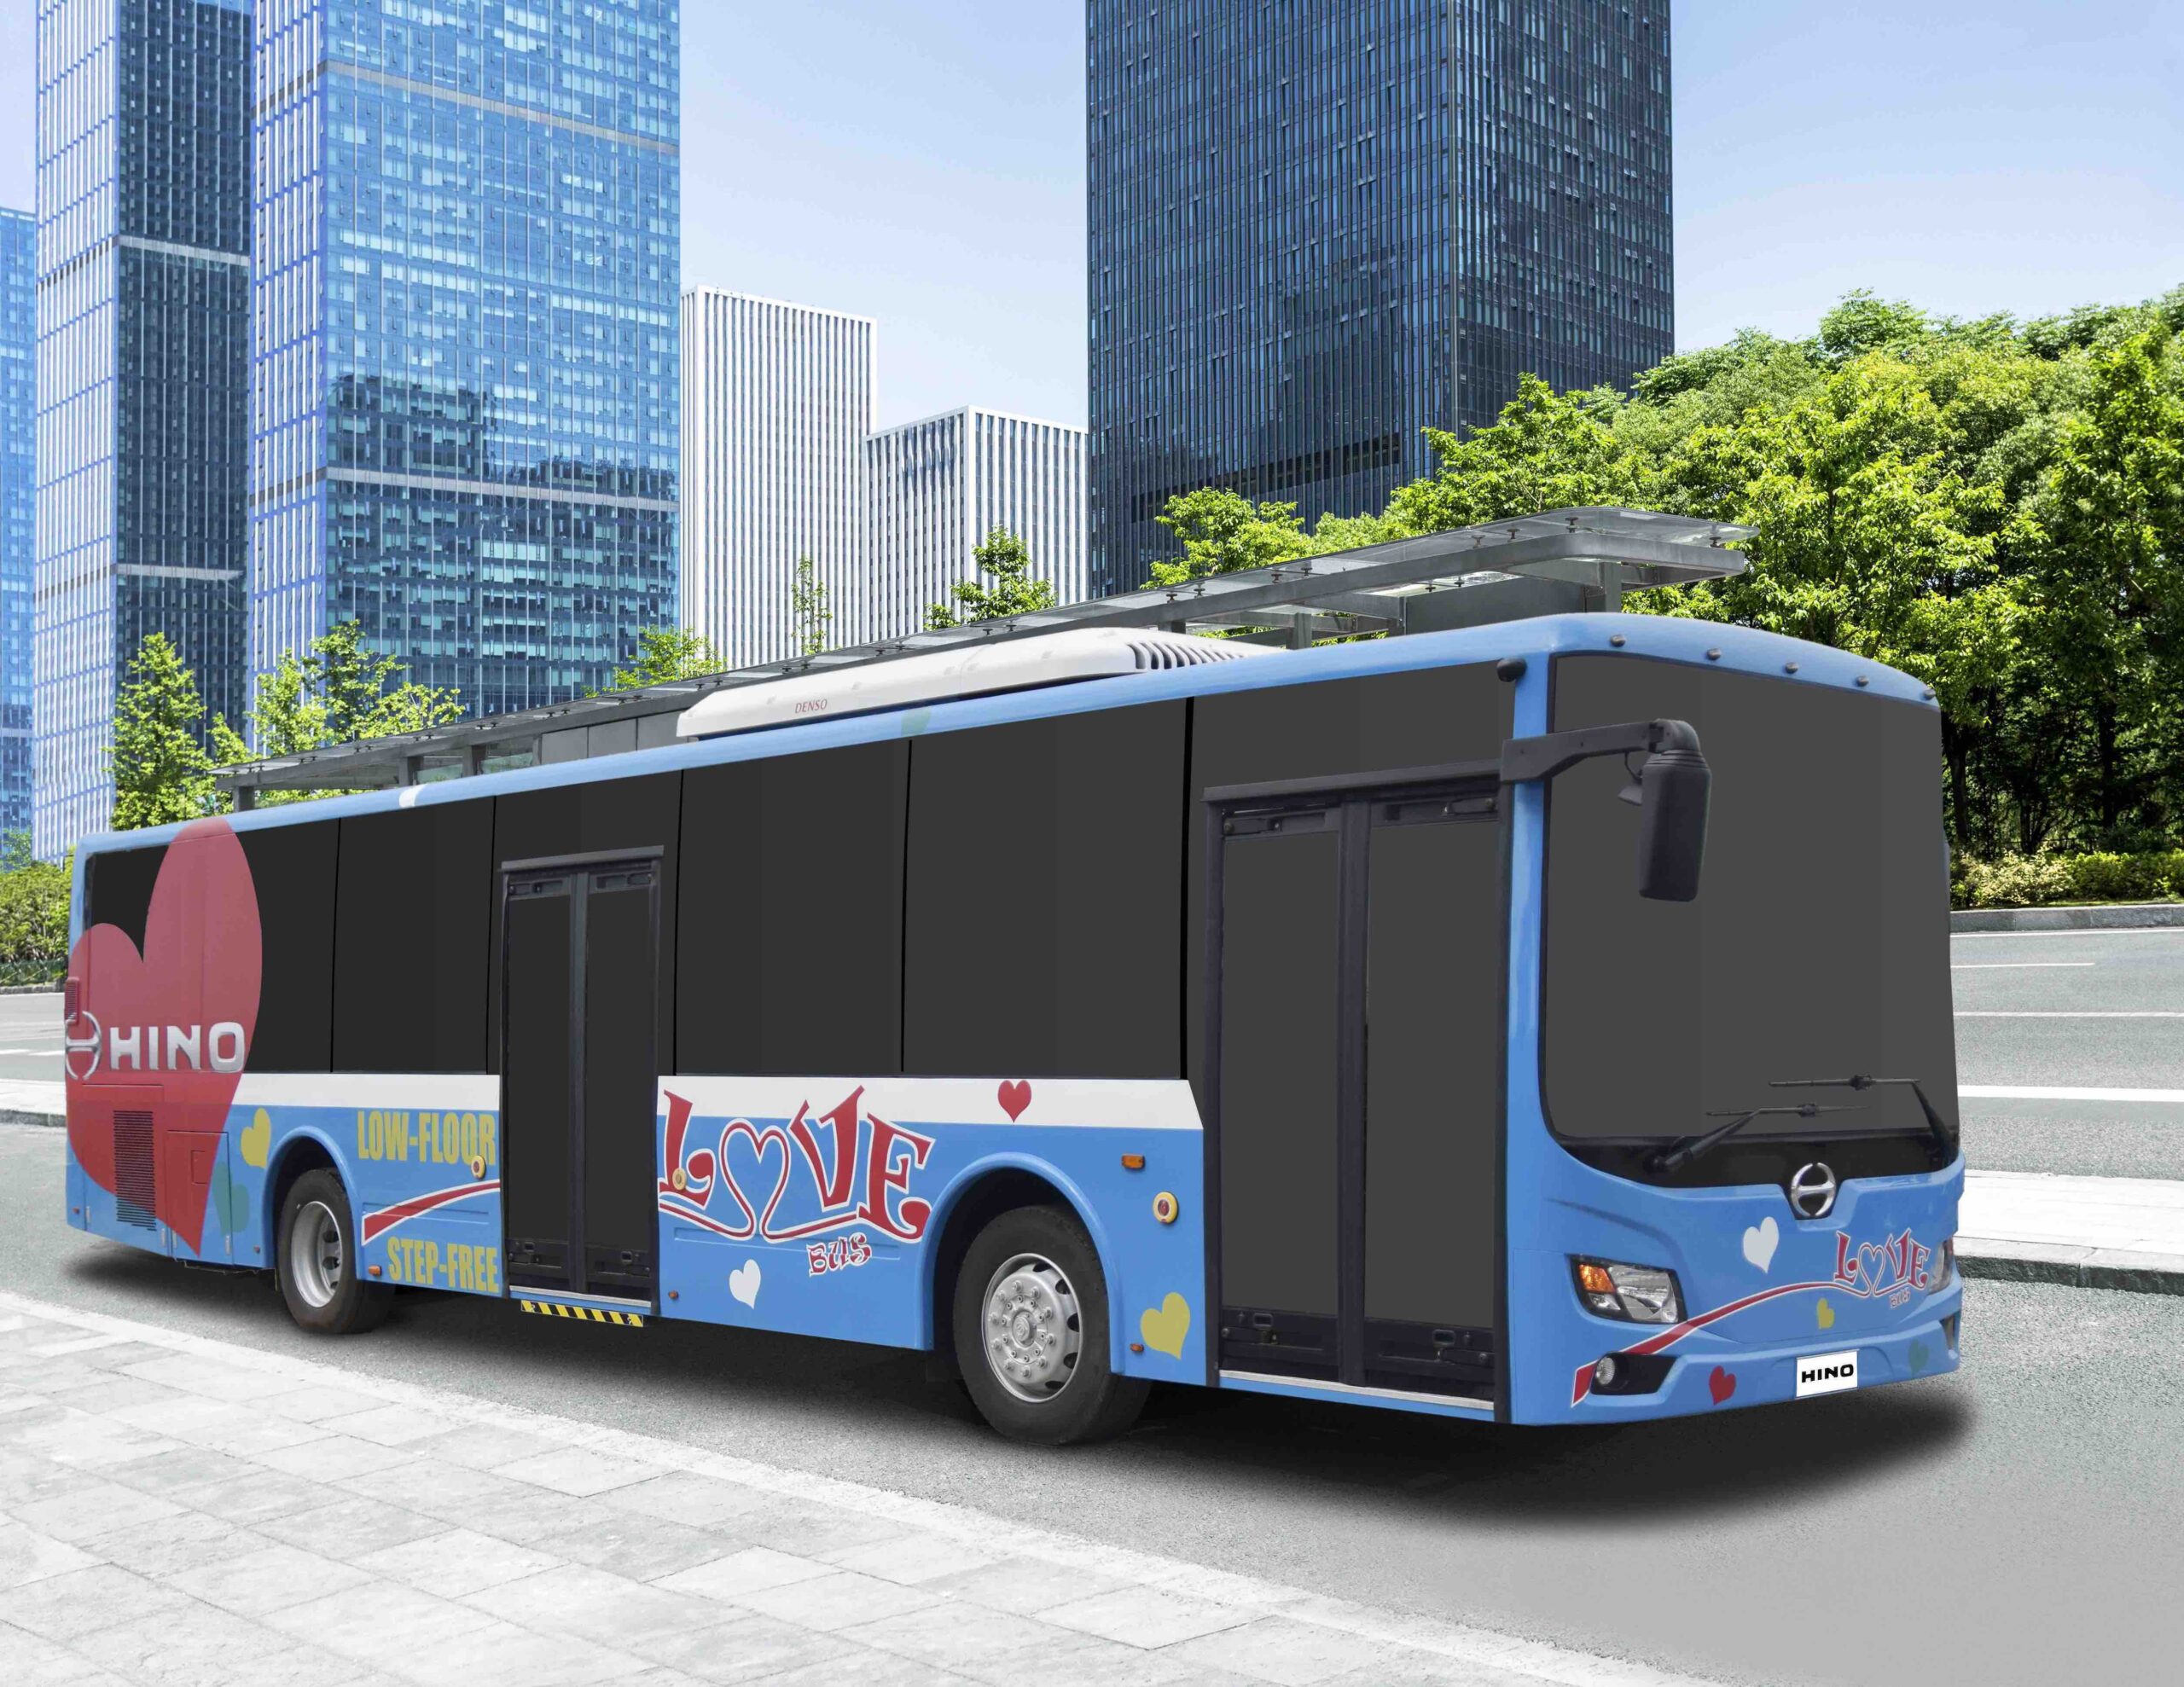 Get to know Hino’s modern Love Bus